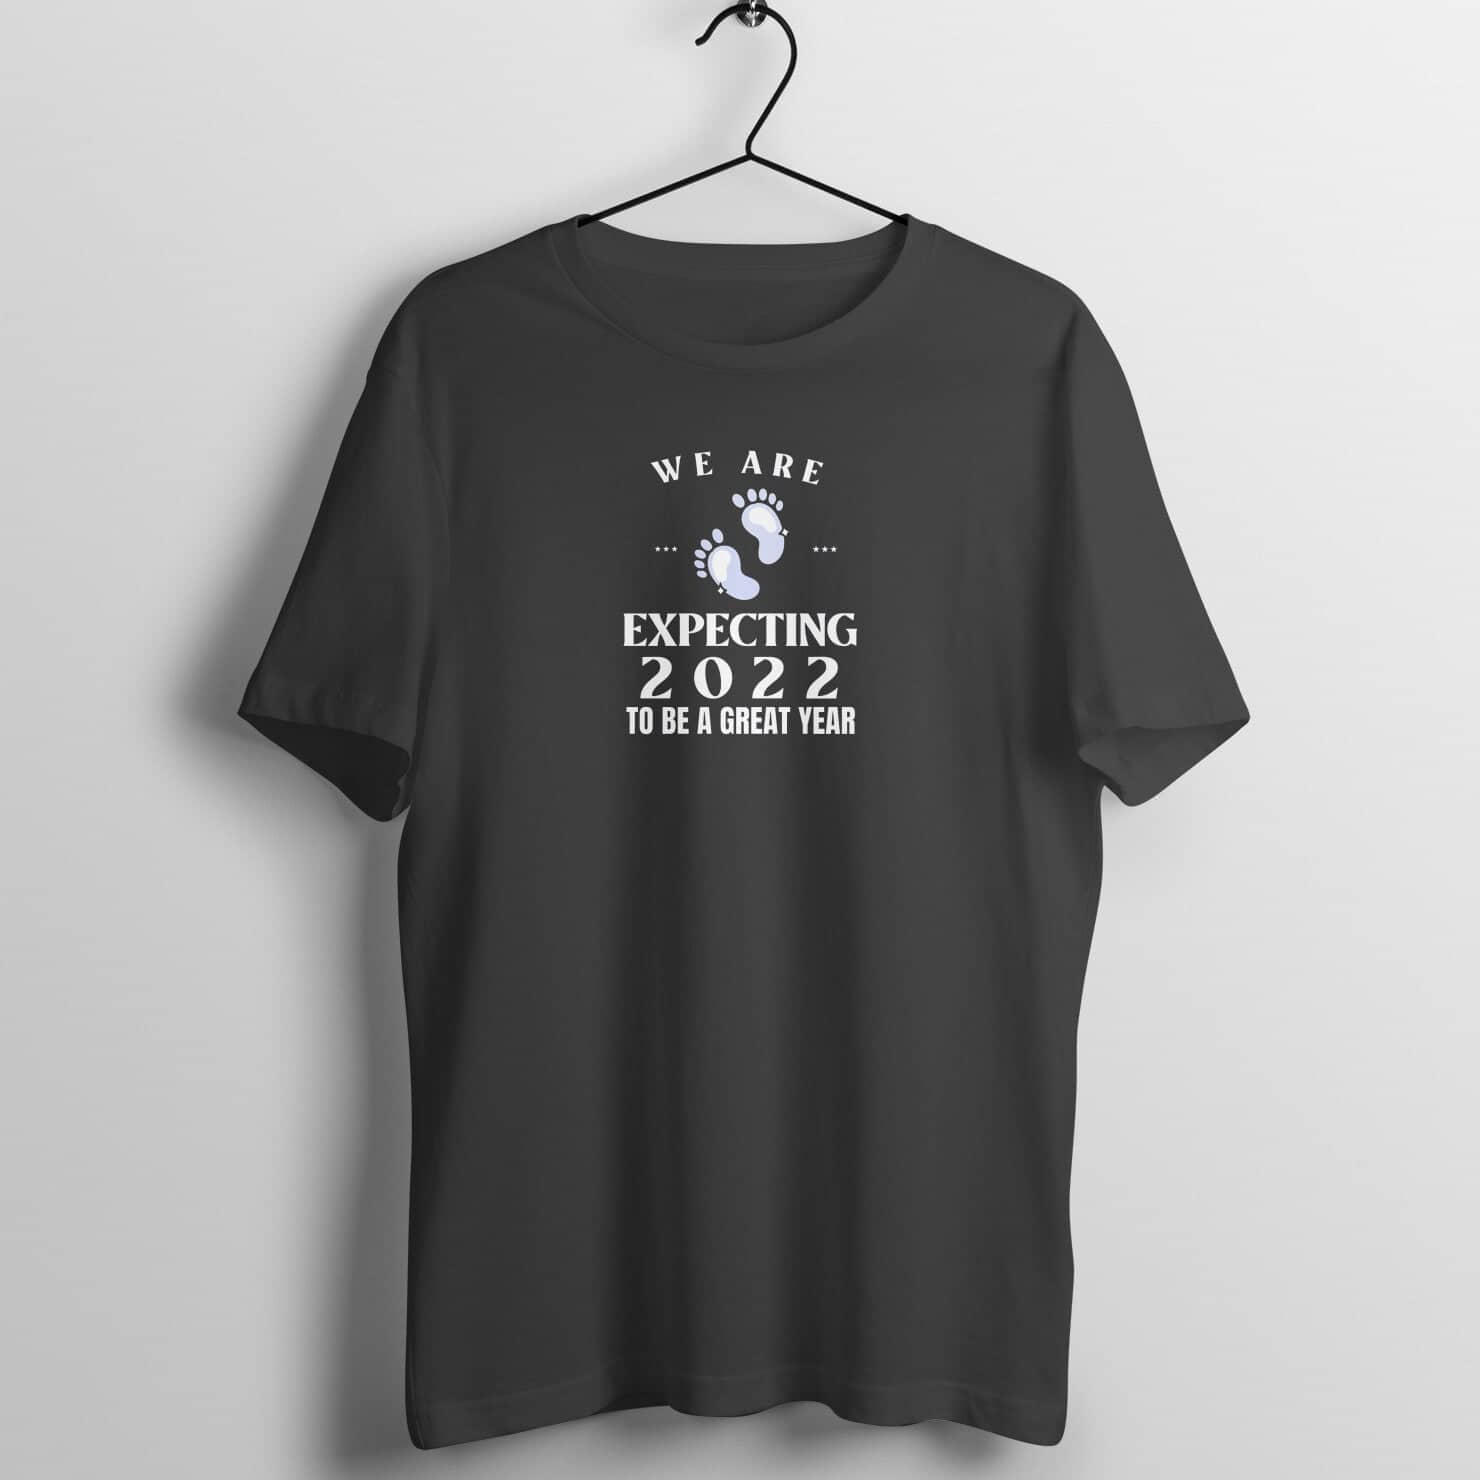 We're Expecting 2022 To Be A Great Year Exclusive New Parents T Shirt for Men and Women Shirts & Tops Printrove Black S 